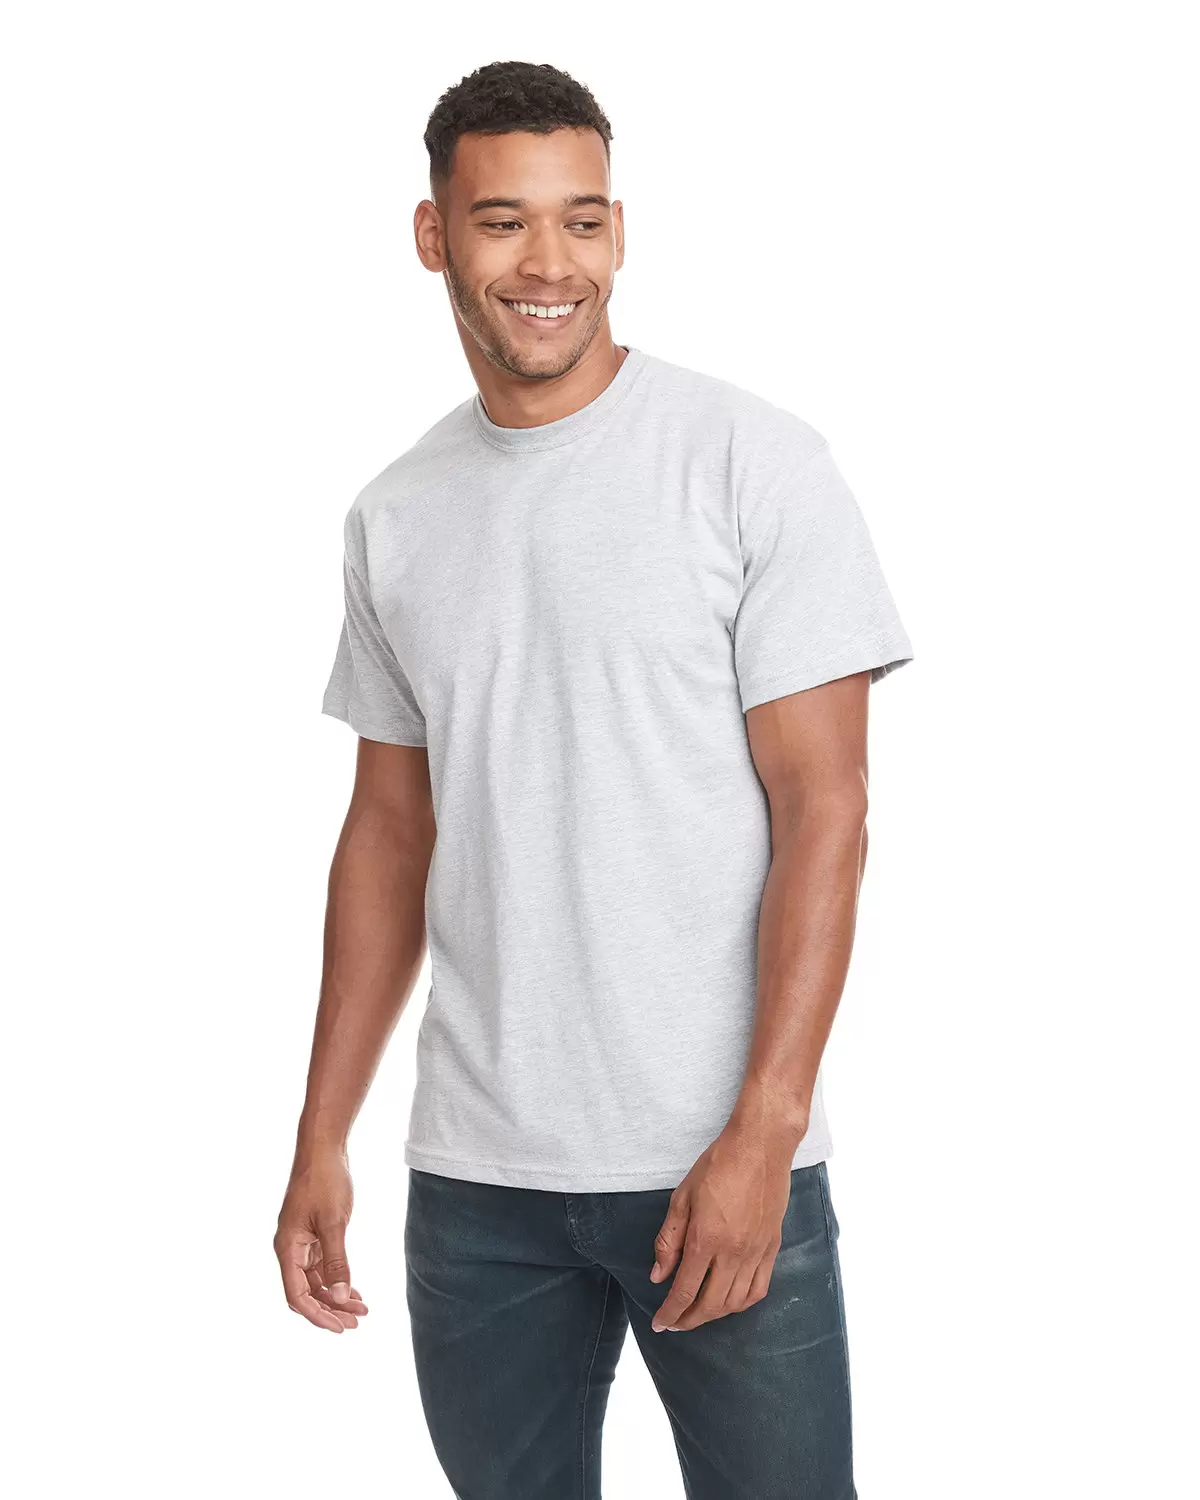 Next Level 3600 T-Shirt Wholesale Blank Premium Cotton Tee | Blankstyle -  From